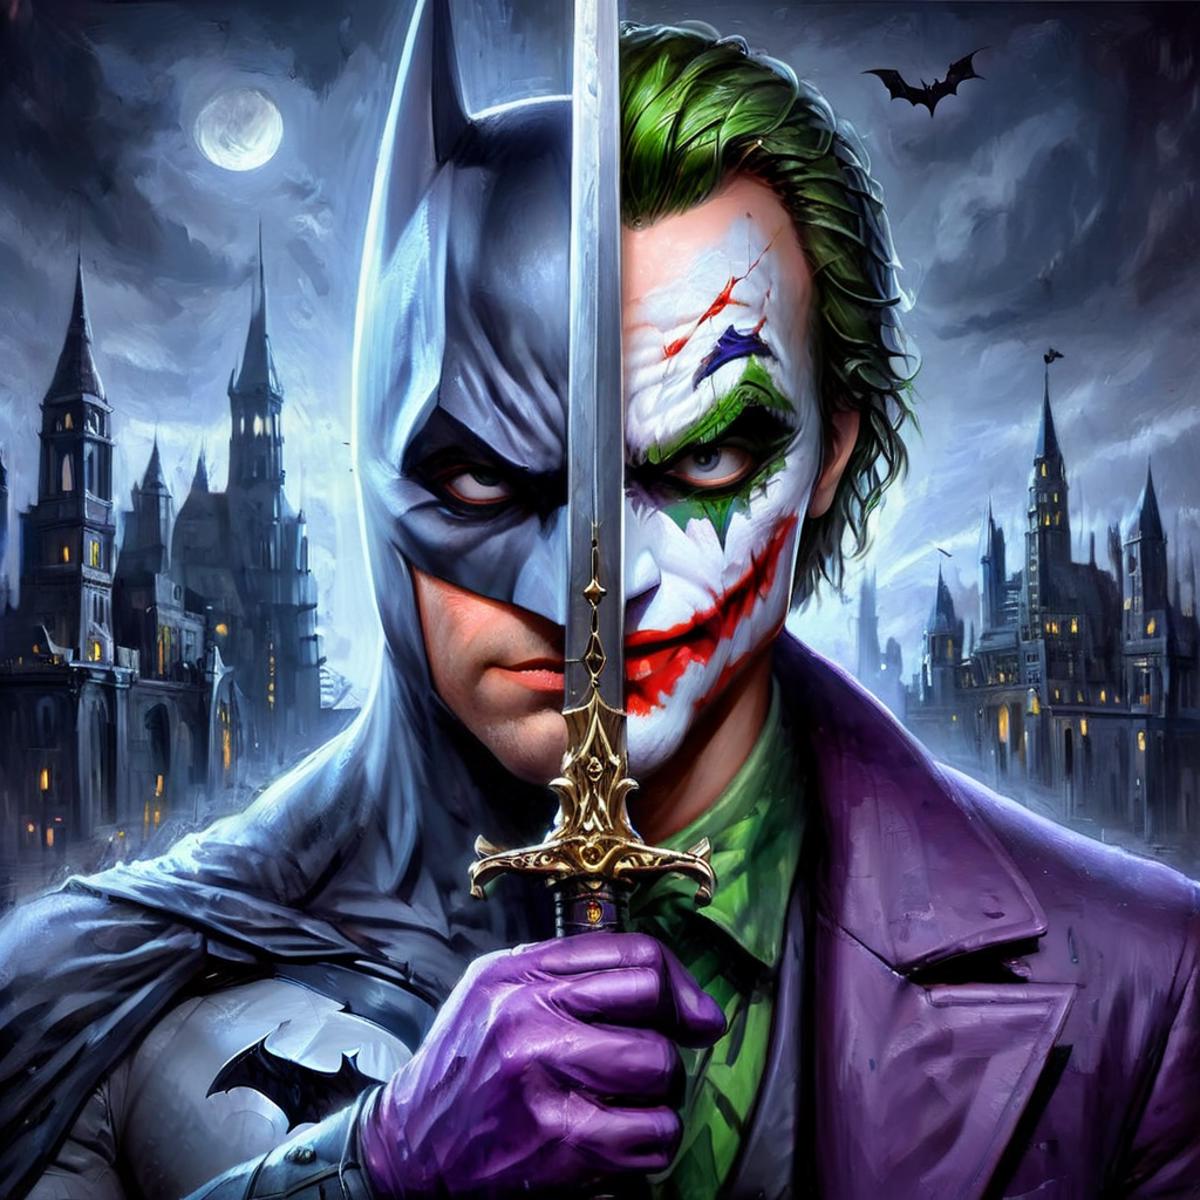 A Batman and Joker painting with a sword.